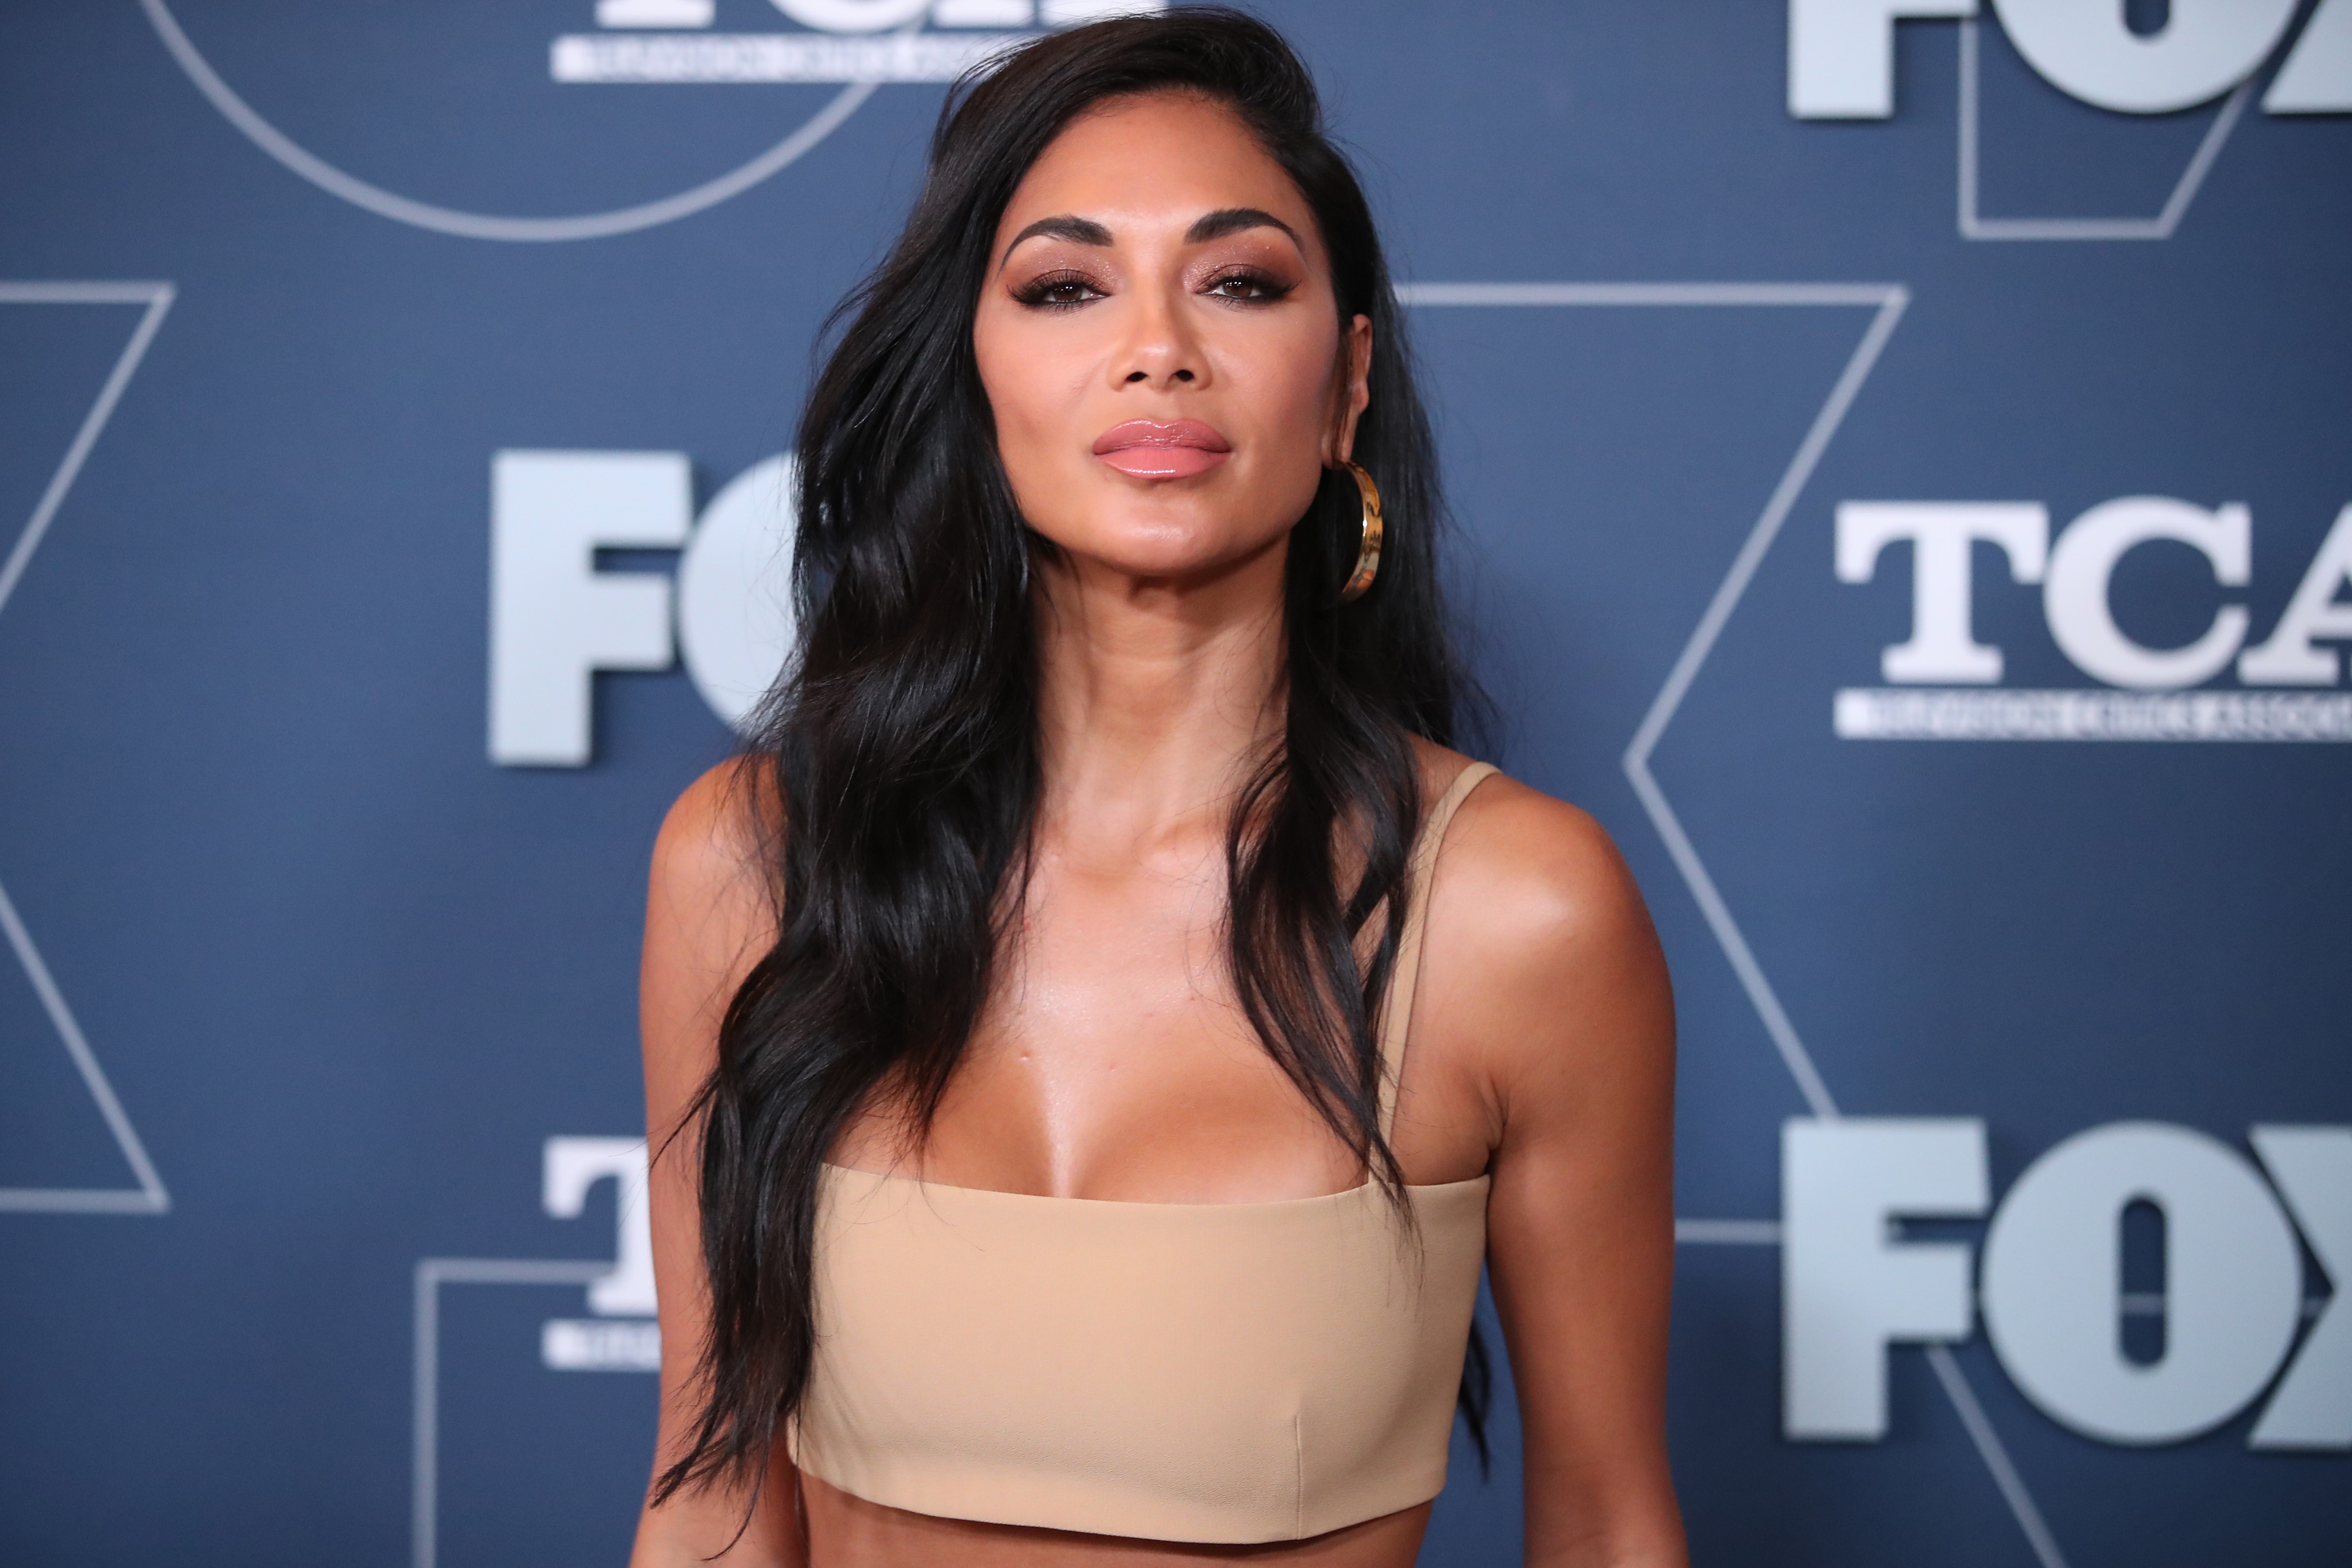 Nicole Scherzinger attends the FOX Winter TCA All Star Party at The Langham Huntington, Pasadena on January 07, 2020, in Pasadena, California. | Source: Getty Images